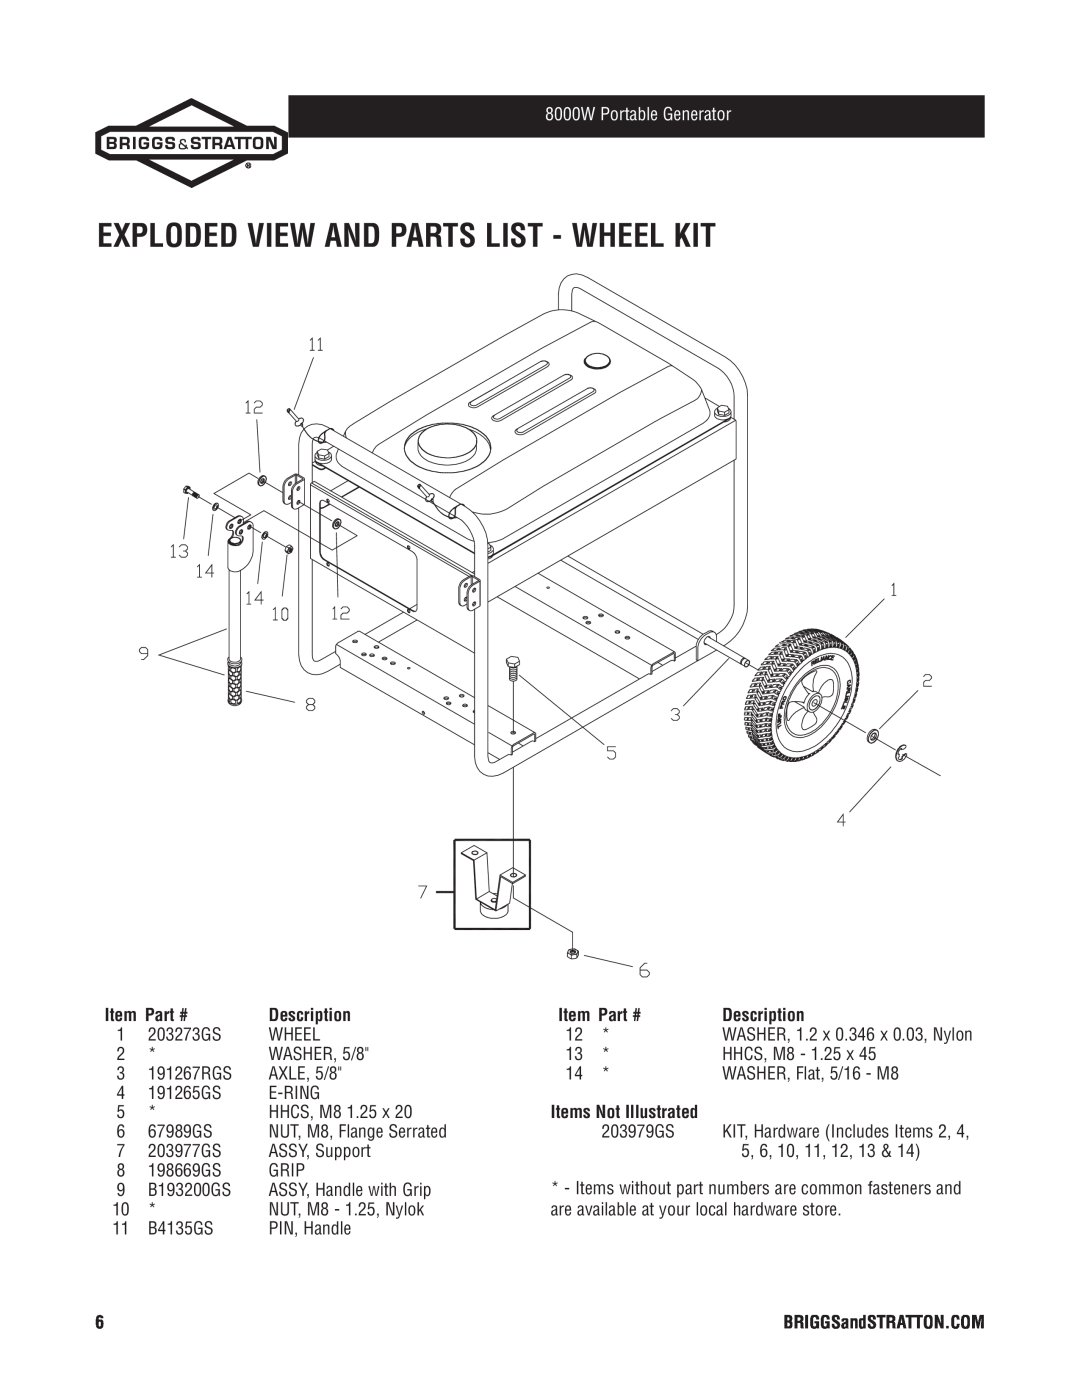 Briggs & Stratton 30334 manual Exploded View And Parts List - Wheel Kit, Items Not Illustrated, 8000W Portable Generator 